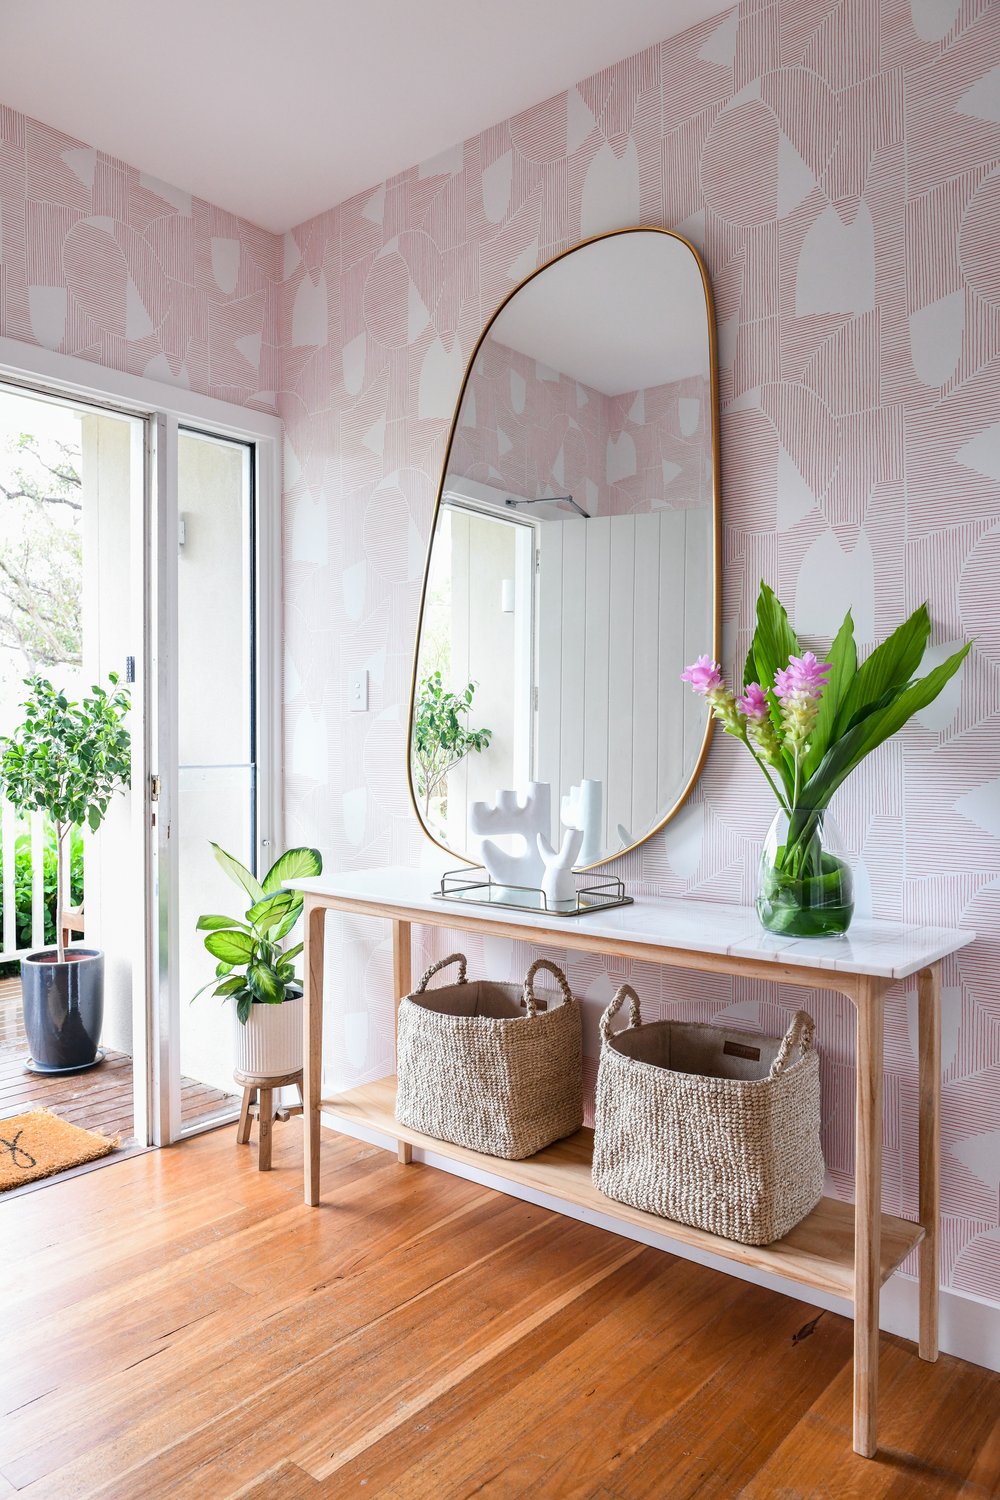 sydney_decorating_entry_console_wallpaper_pink